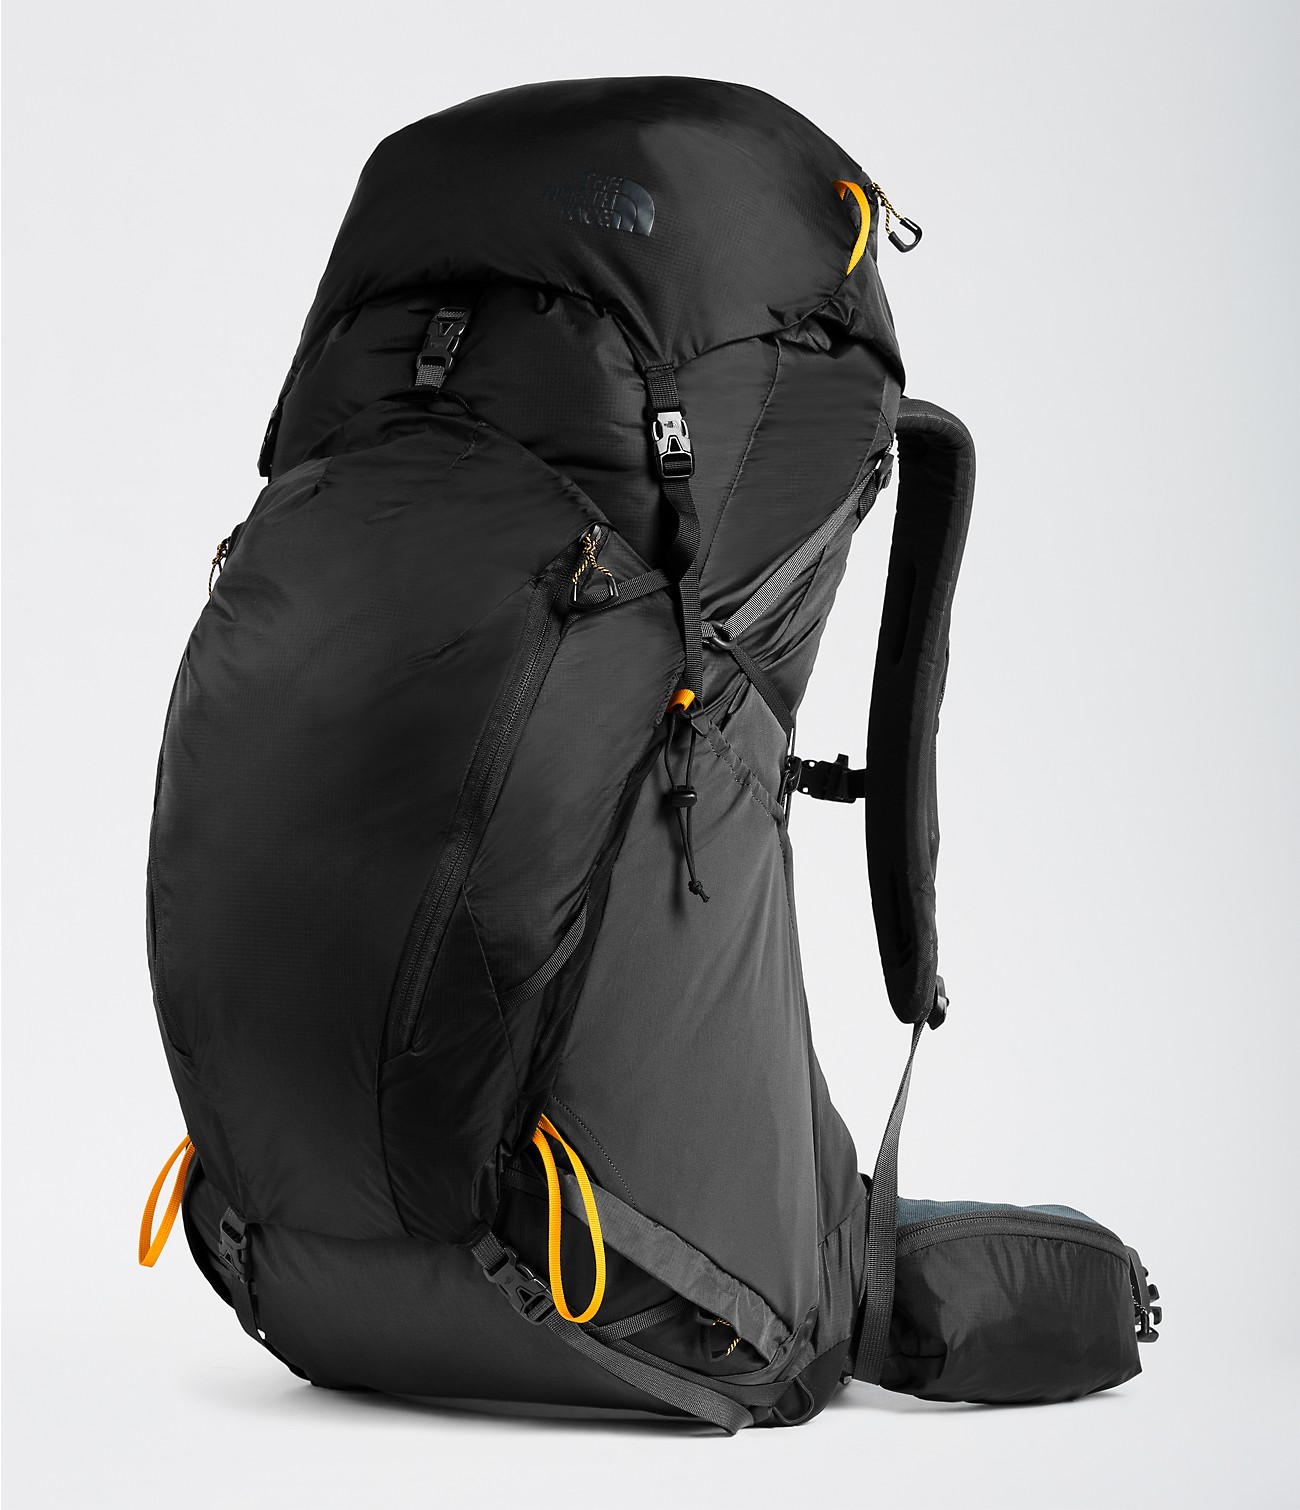 Unlock Wilderness' choice in the Rei Vs North Face comparison, the Banchee 50 Backpack by The North Face